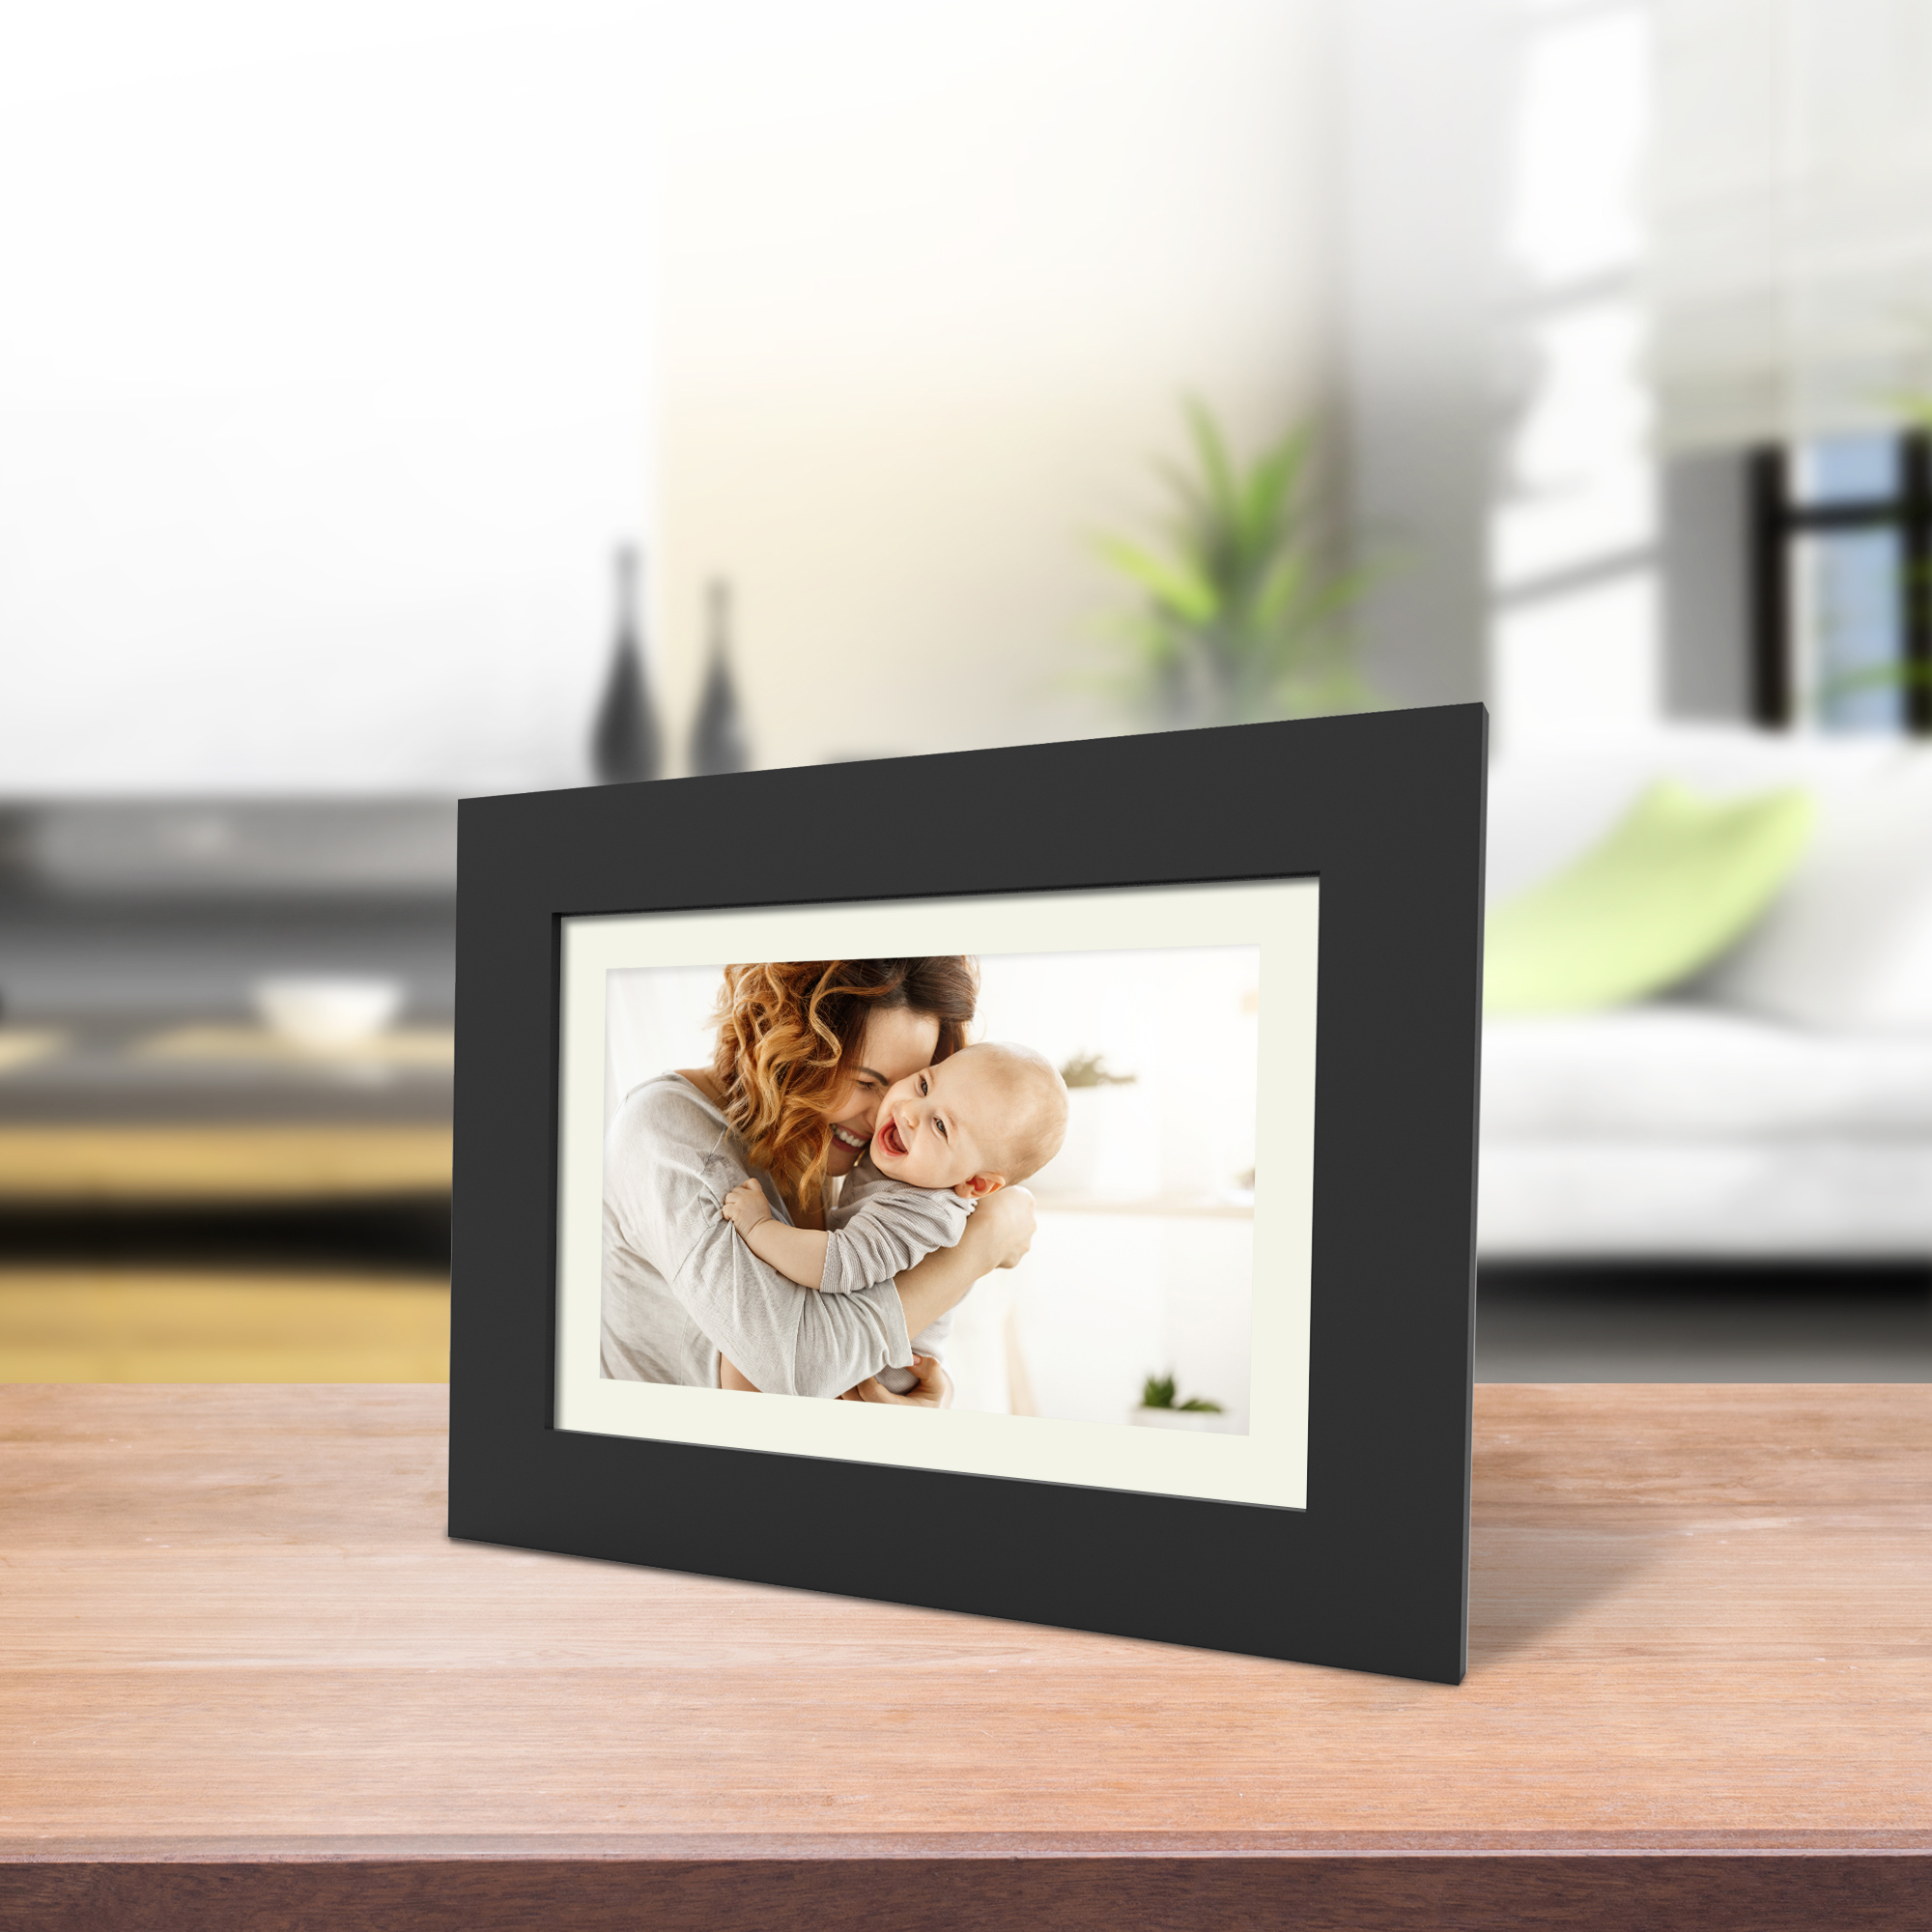 1st Gen. Simplysmart Home Friends And Family 10.1” Wi-Fi Smart Digital Picture Frame, Send Pictures From Phone To Frame, Hd 1080P Touchscreen, 8Gb Internal Memory - image 2 of 5